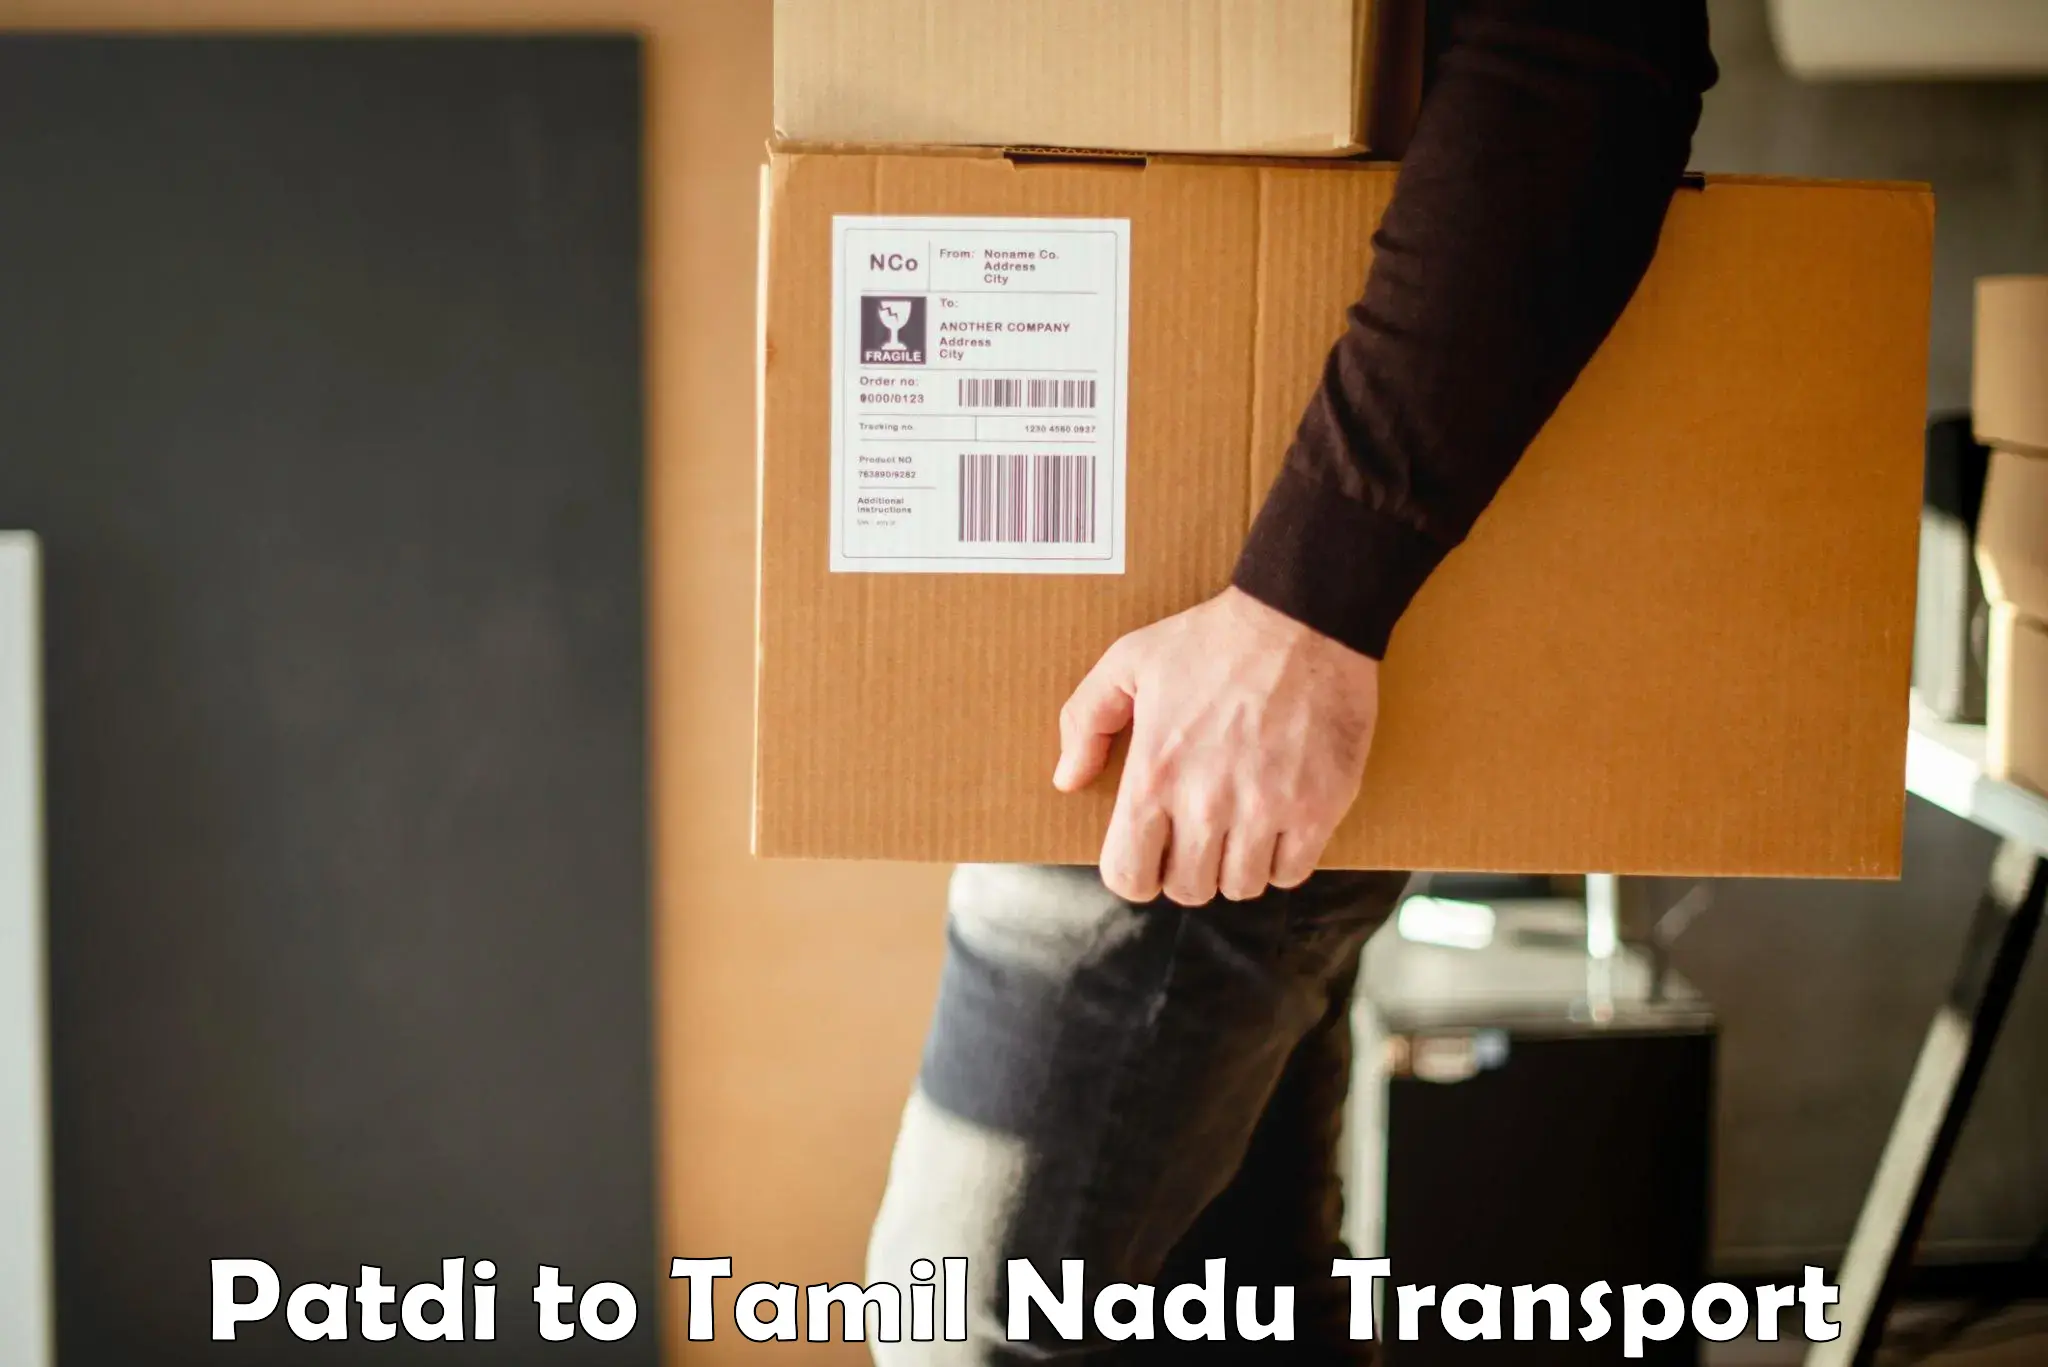 Material transport services Patdi to Vellore Institute of Technology